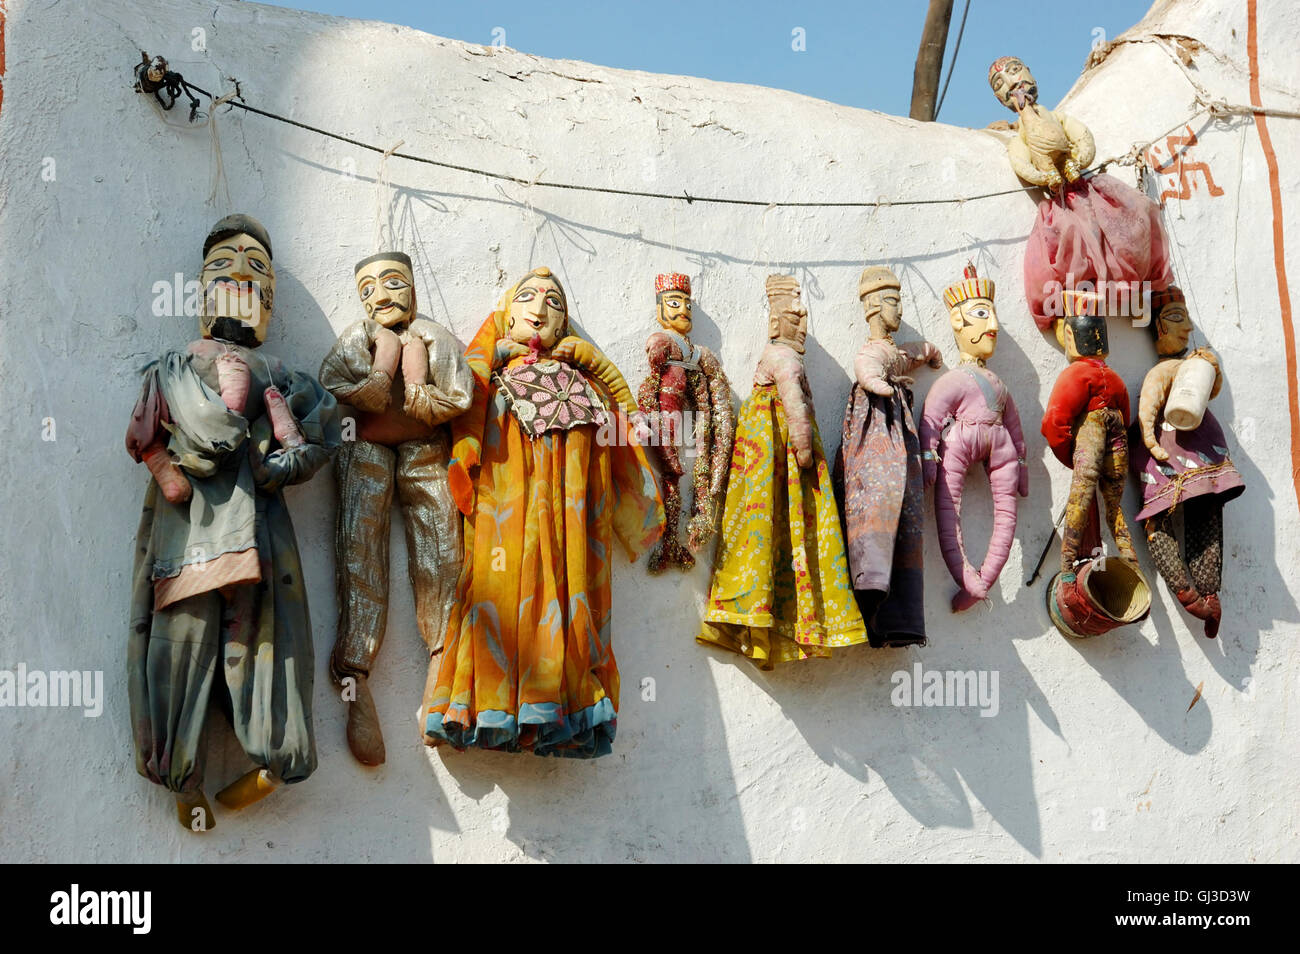 Traditional handmade rajastani puppets for sale in Jaisalmer,India Stock Photo